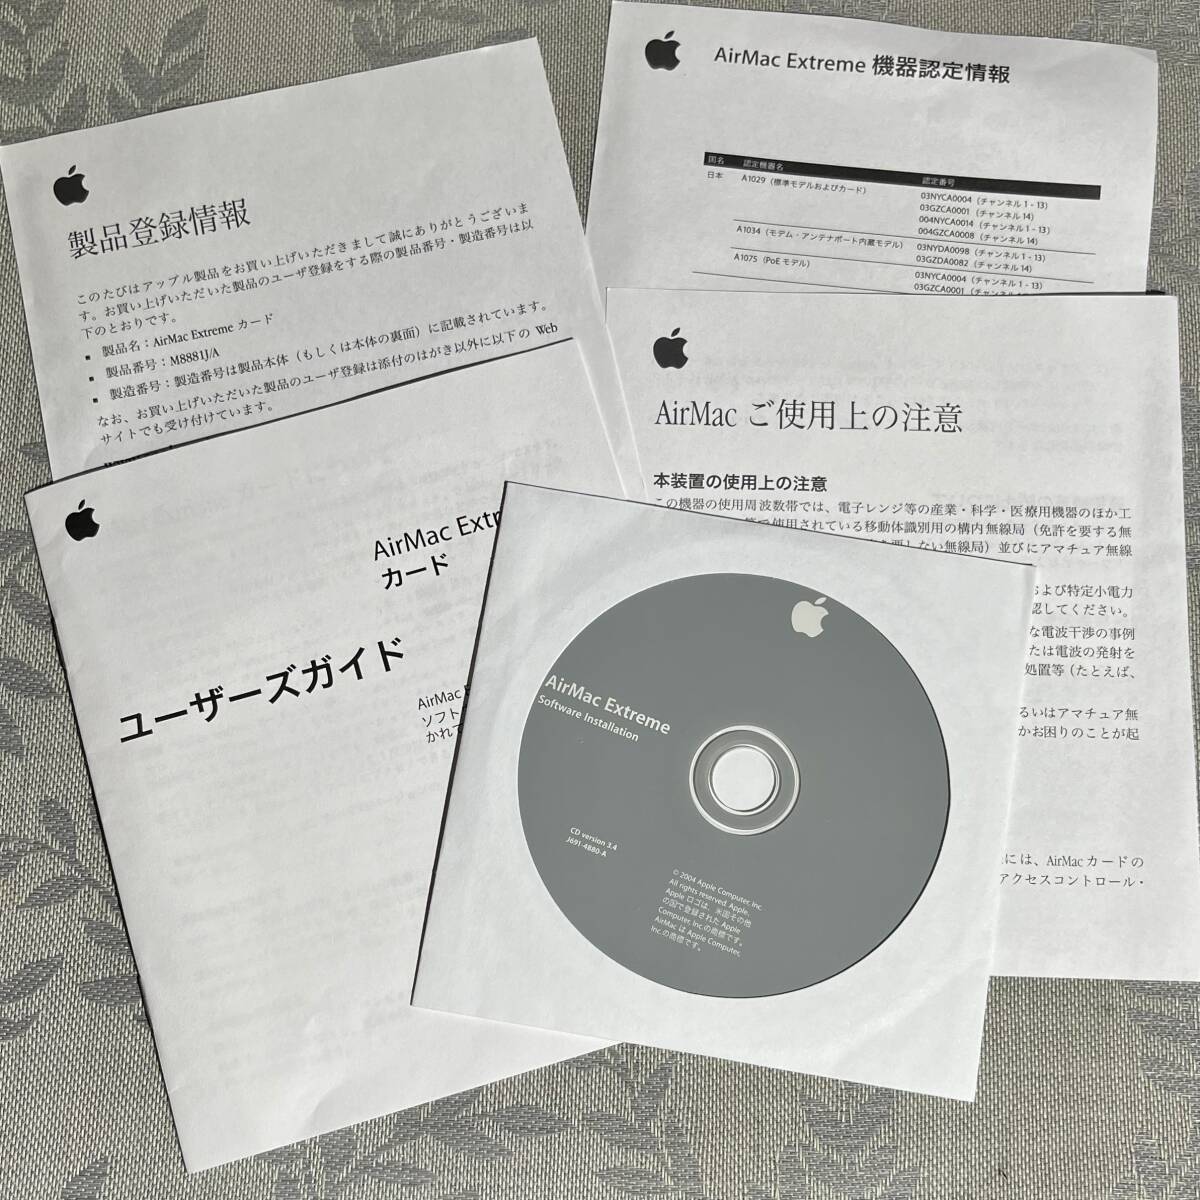 Apple Software Installation CD: AirMac 2002 Version 2.0.2 & AirMac Extreme 2004 Version 3.4：付属説明書付き_AirMac Extreme (Ver. 3.4)